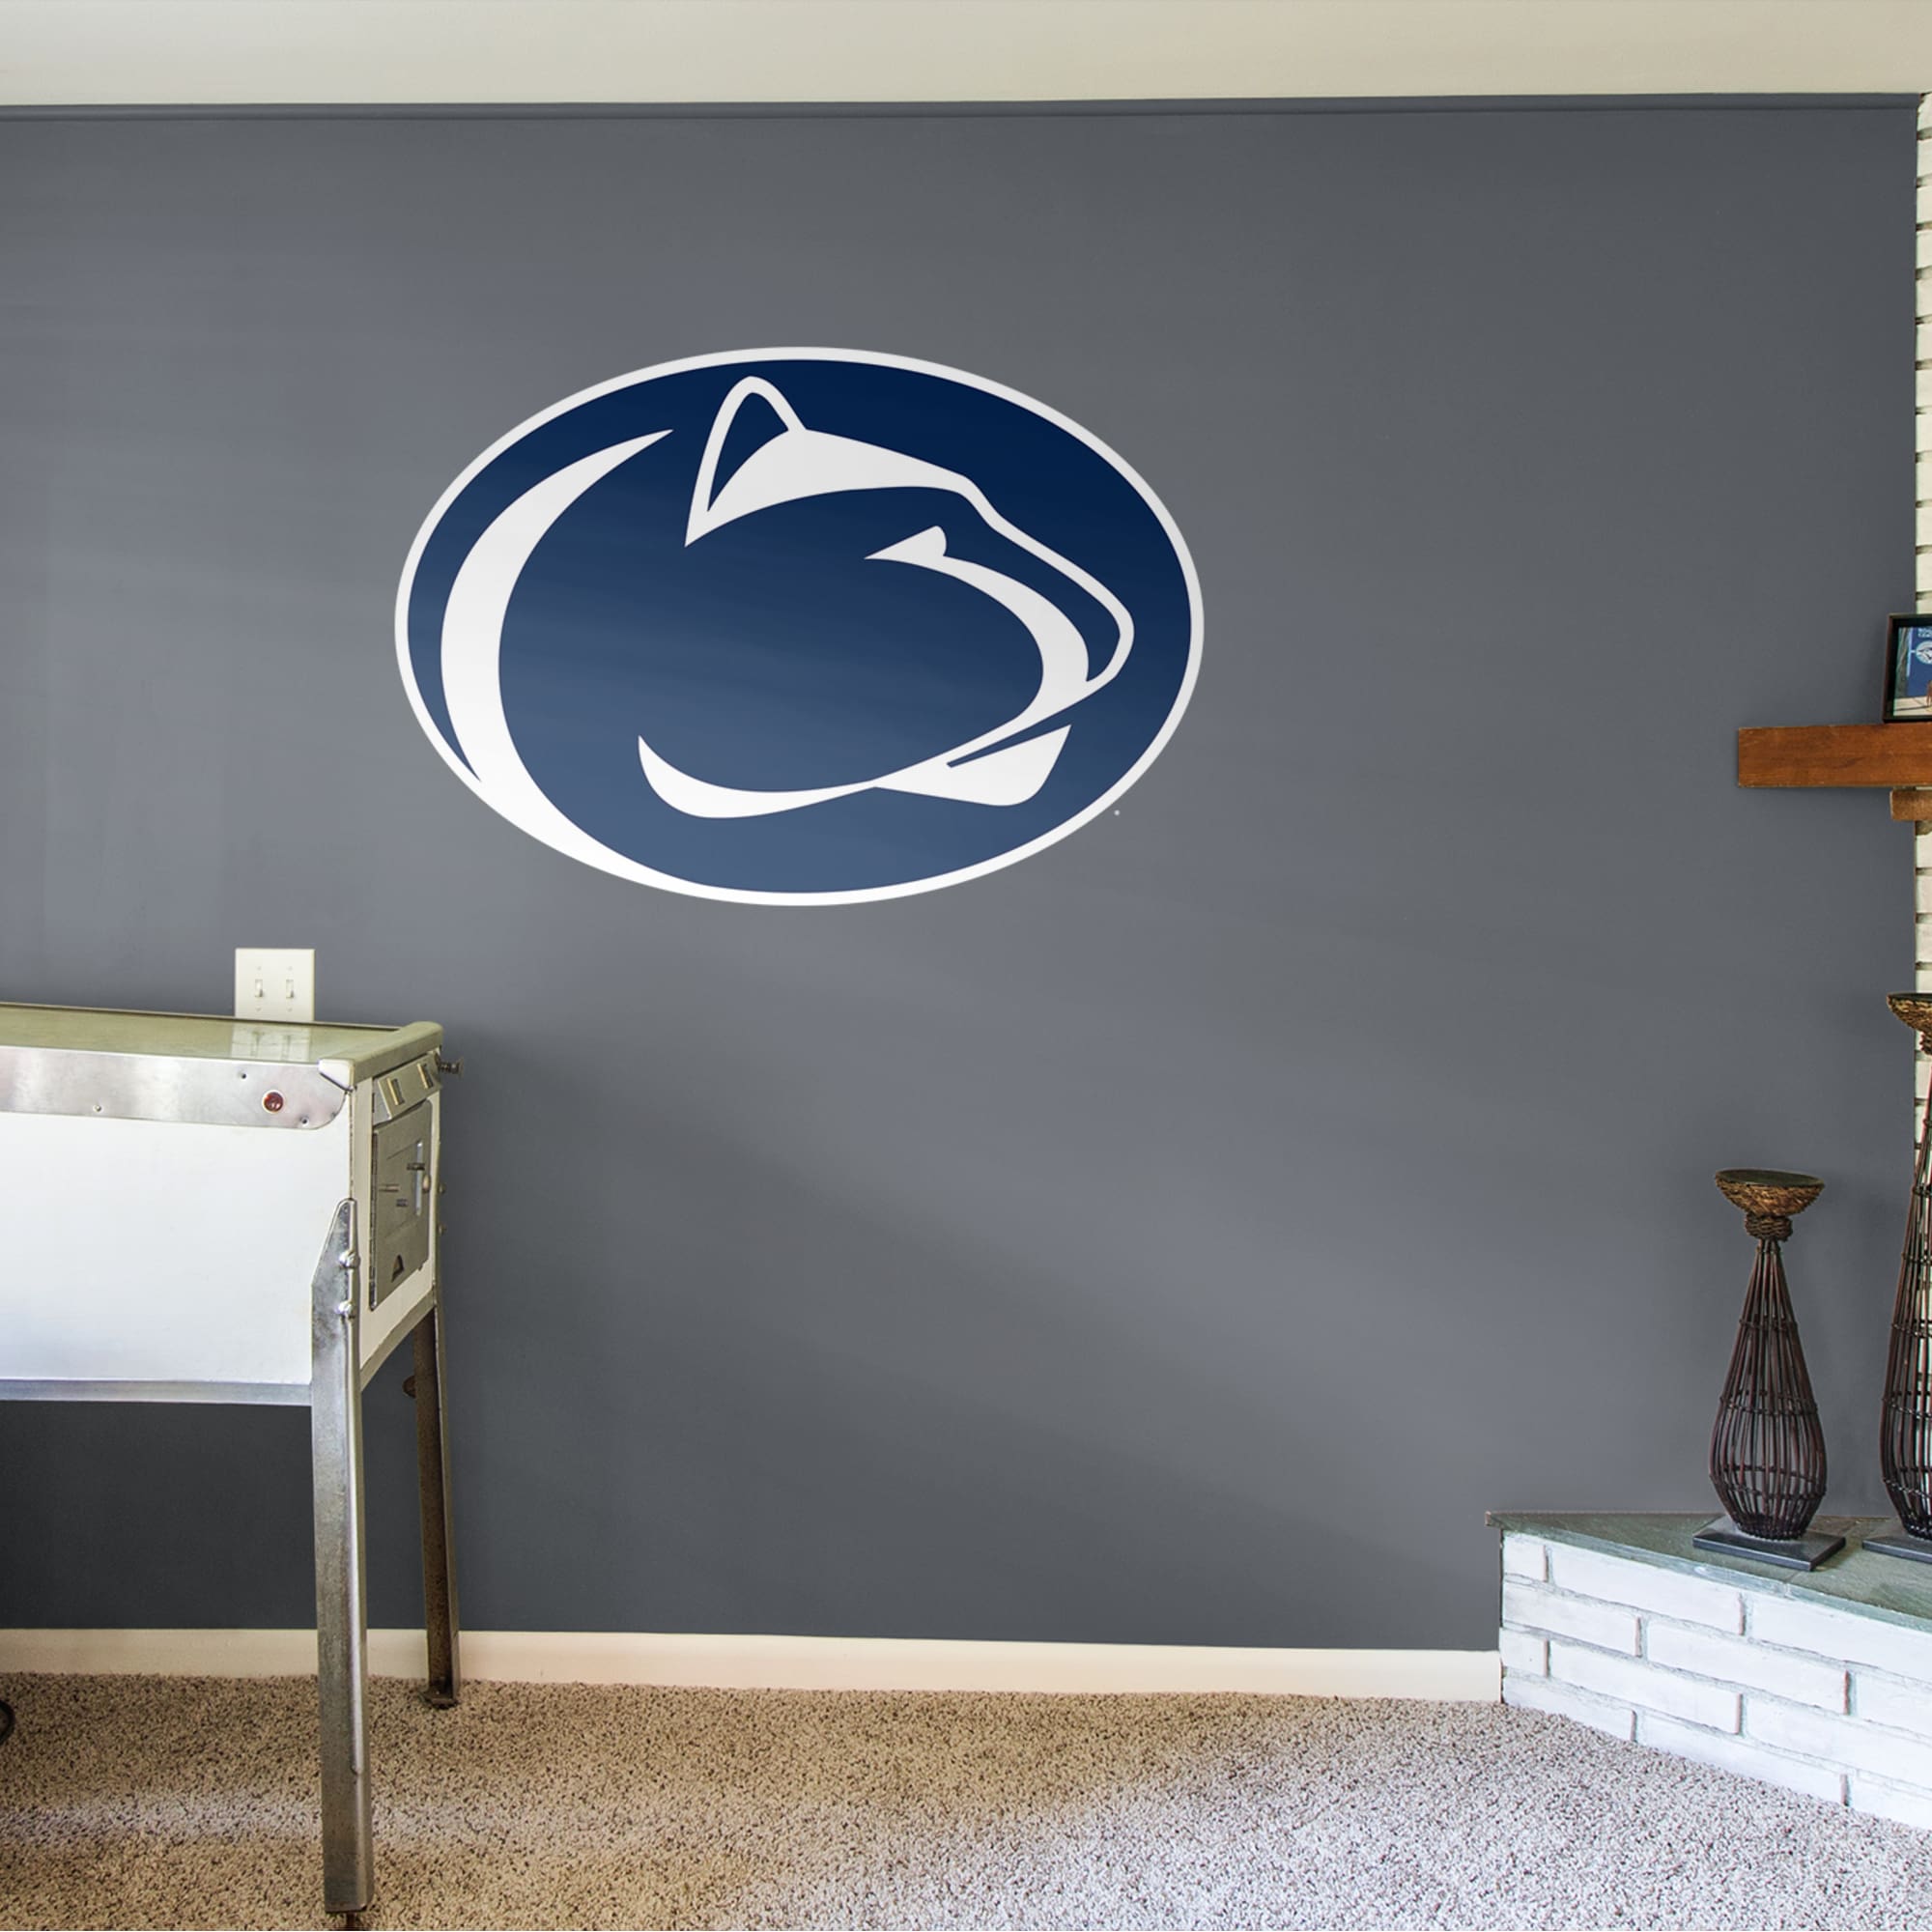 Penn State Nittany Lions: Logo - Officially Licensed Removable Wall Decal 50.0"W x 35.0"H by Fathead | Vinyl